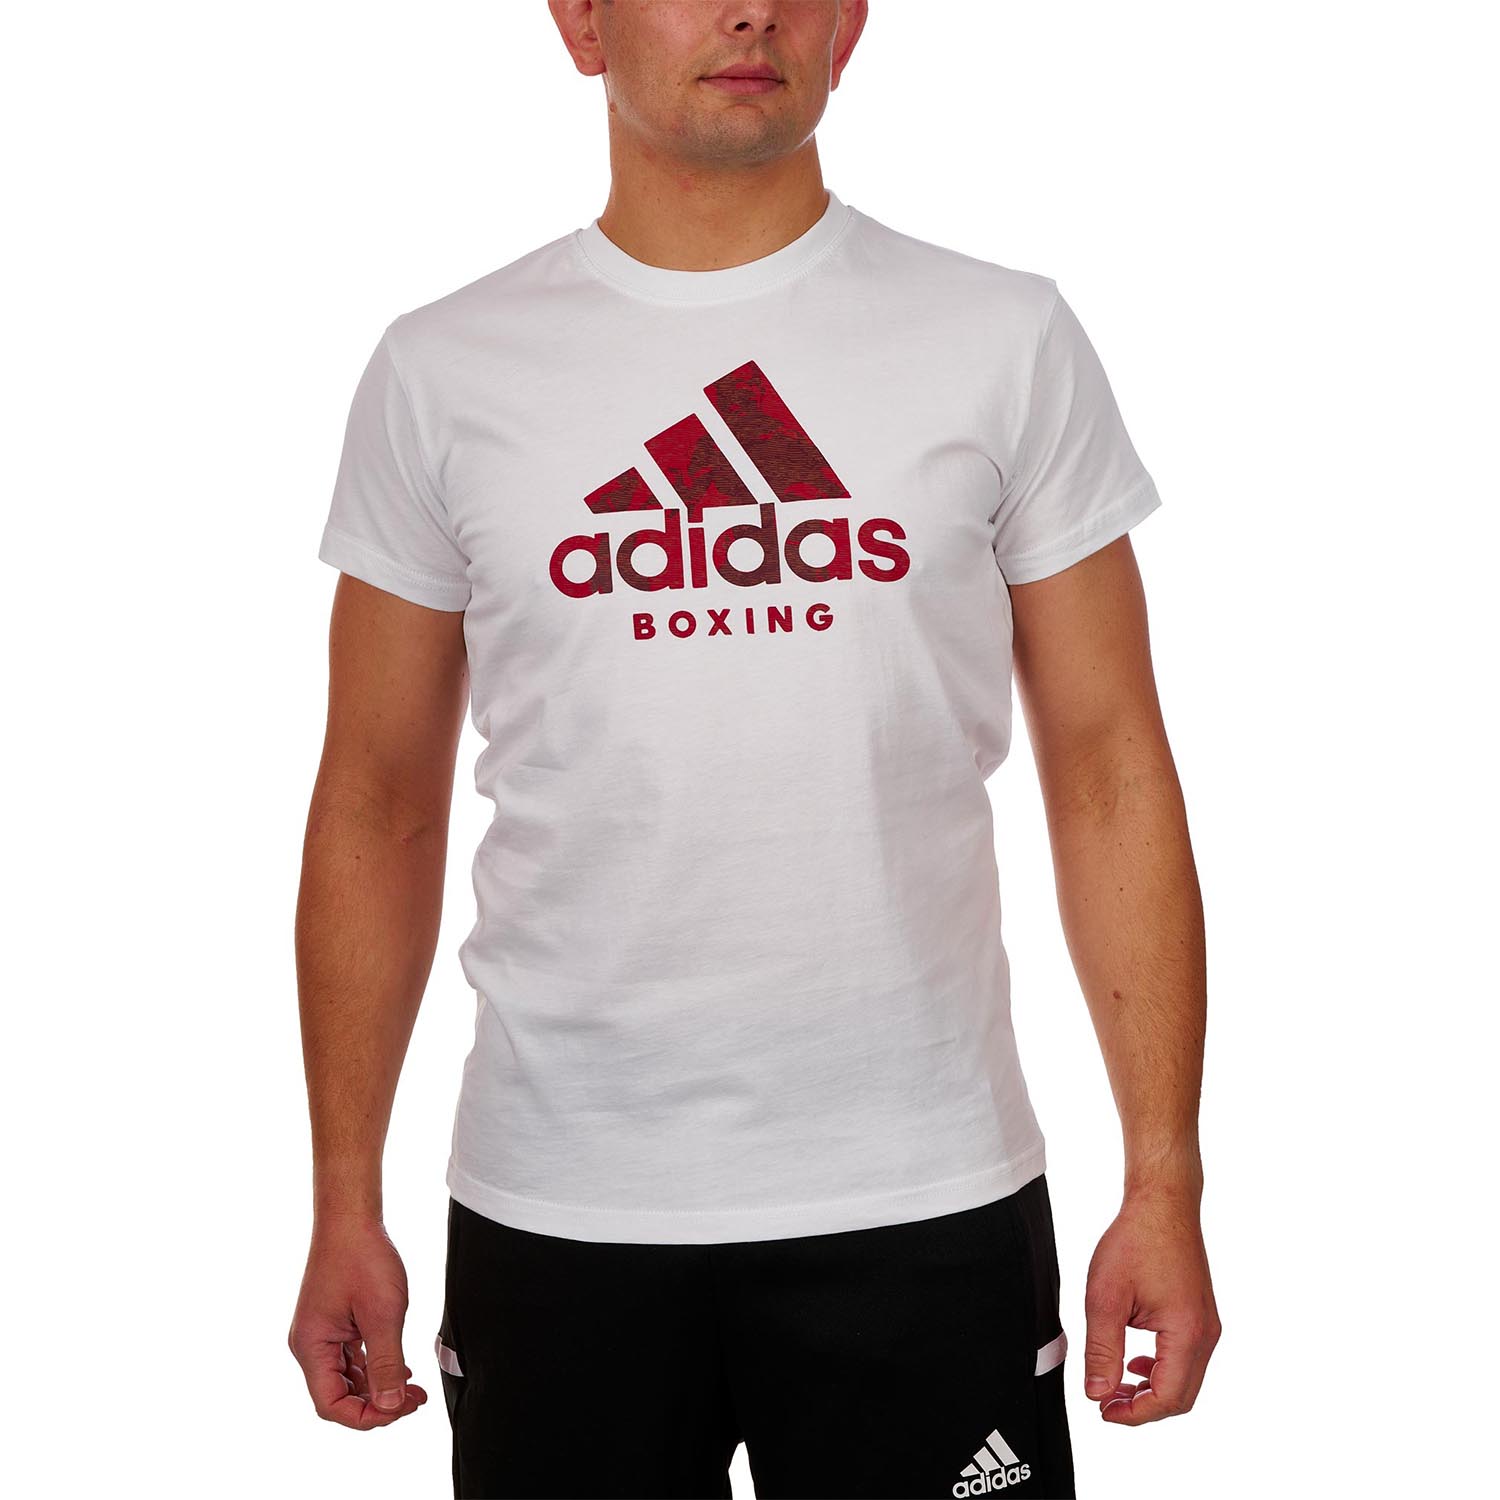 adidas T-Shirt, Badge Of Sport, Boxing, white, S